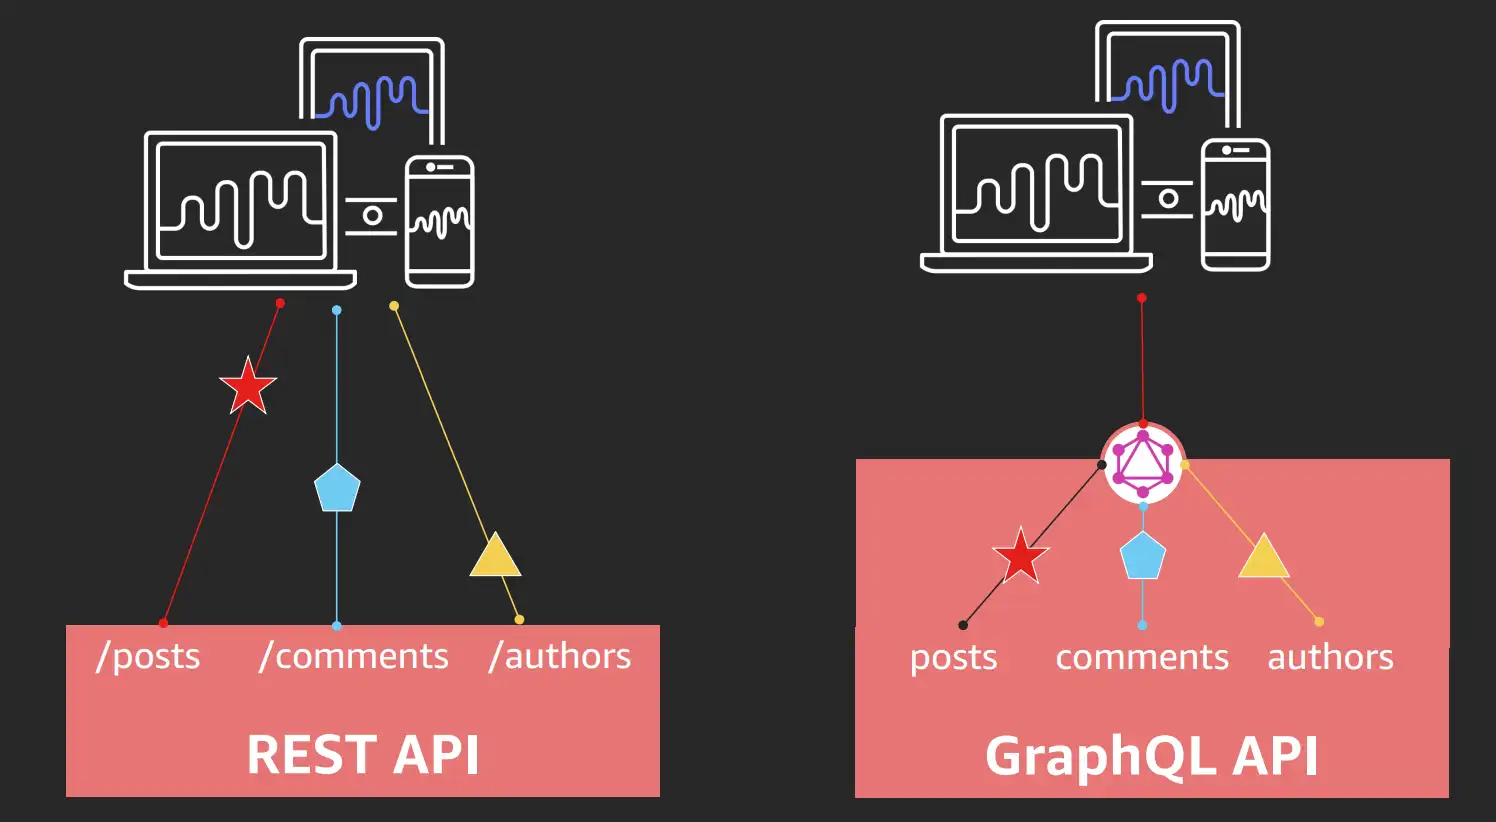 Illustration showing differences between REST and GraphQL API. REST API takes 3 requests compared to GraphQL that only takes one.